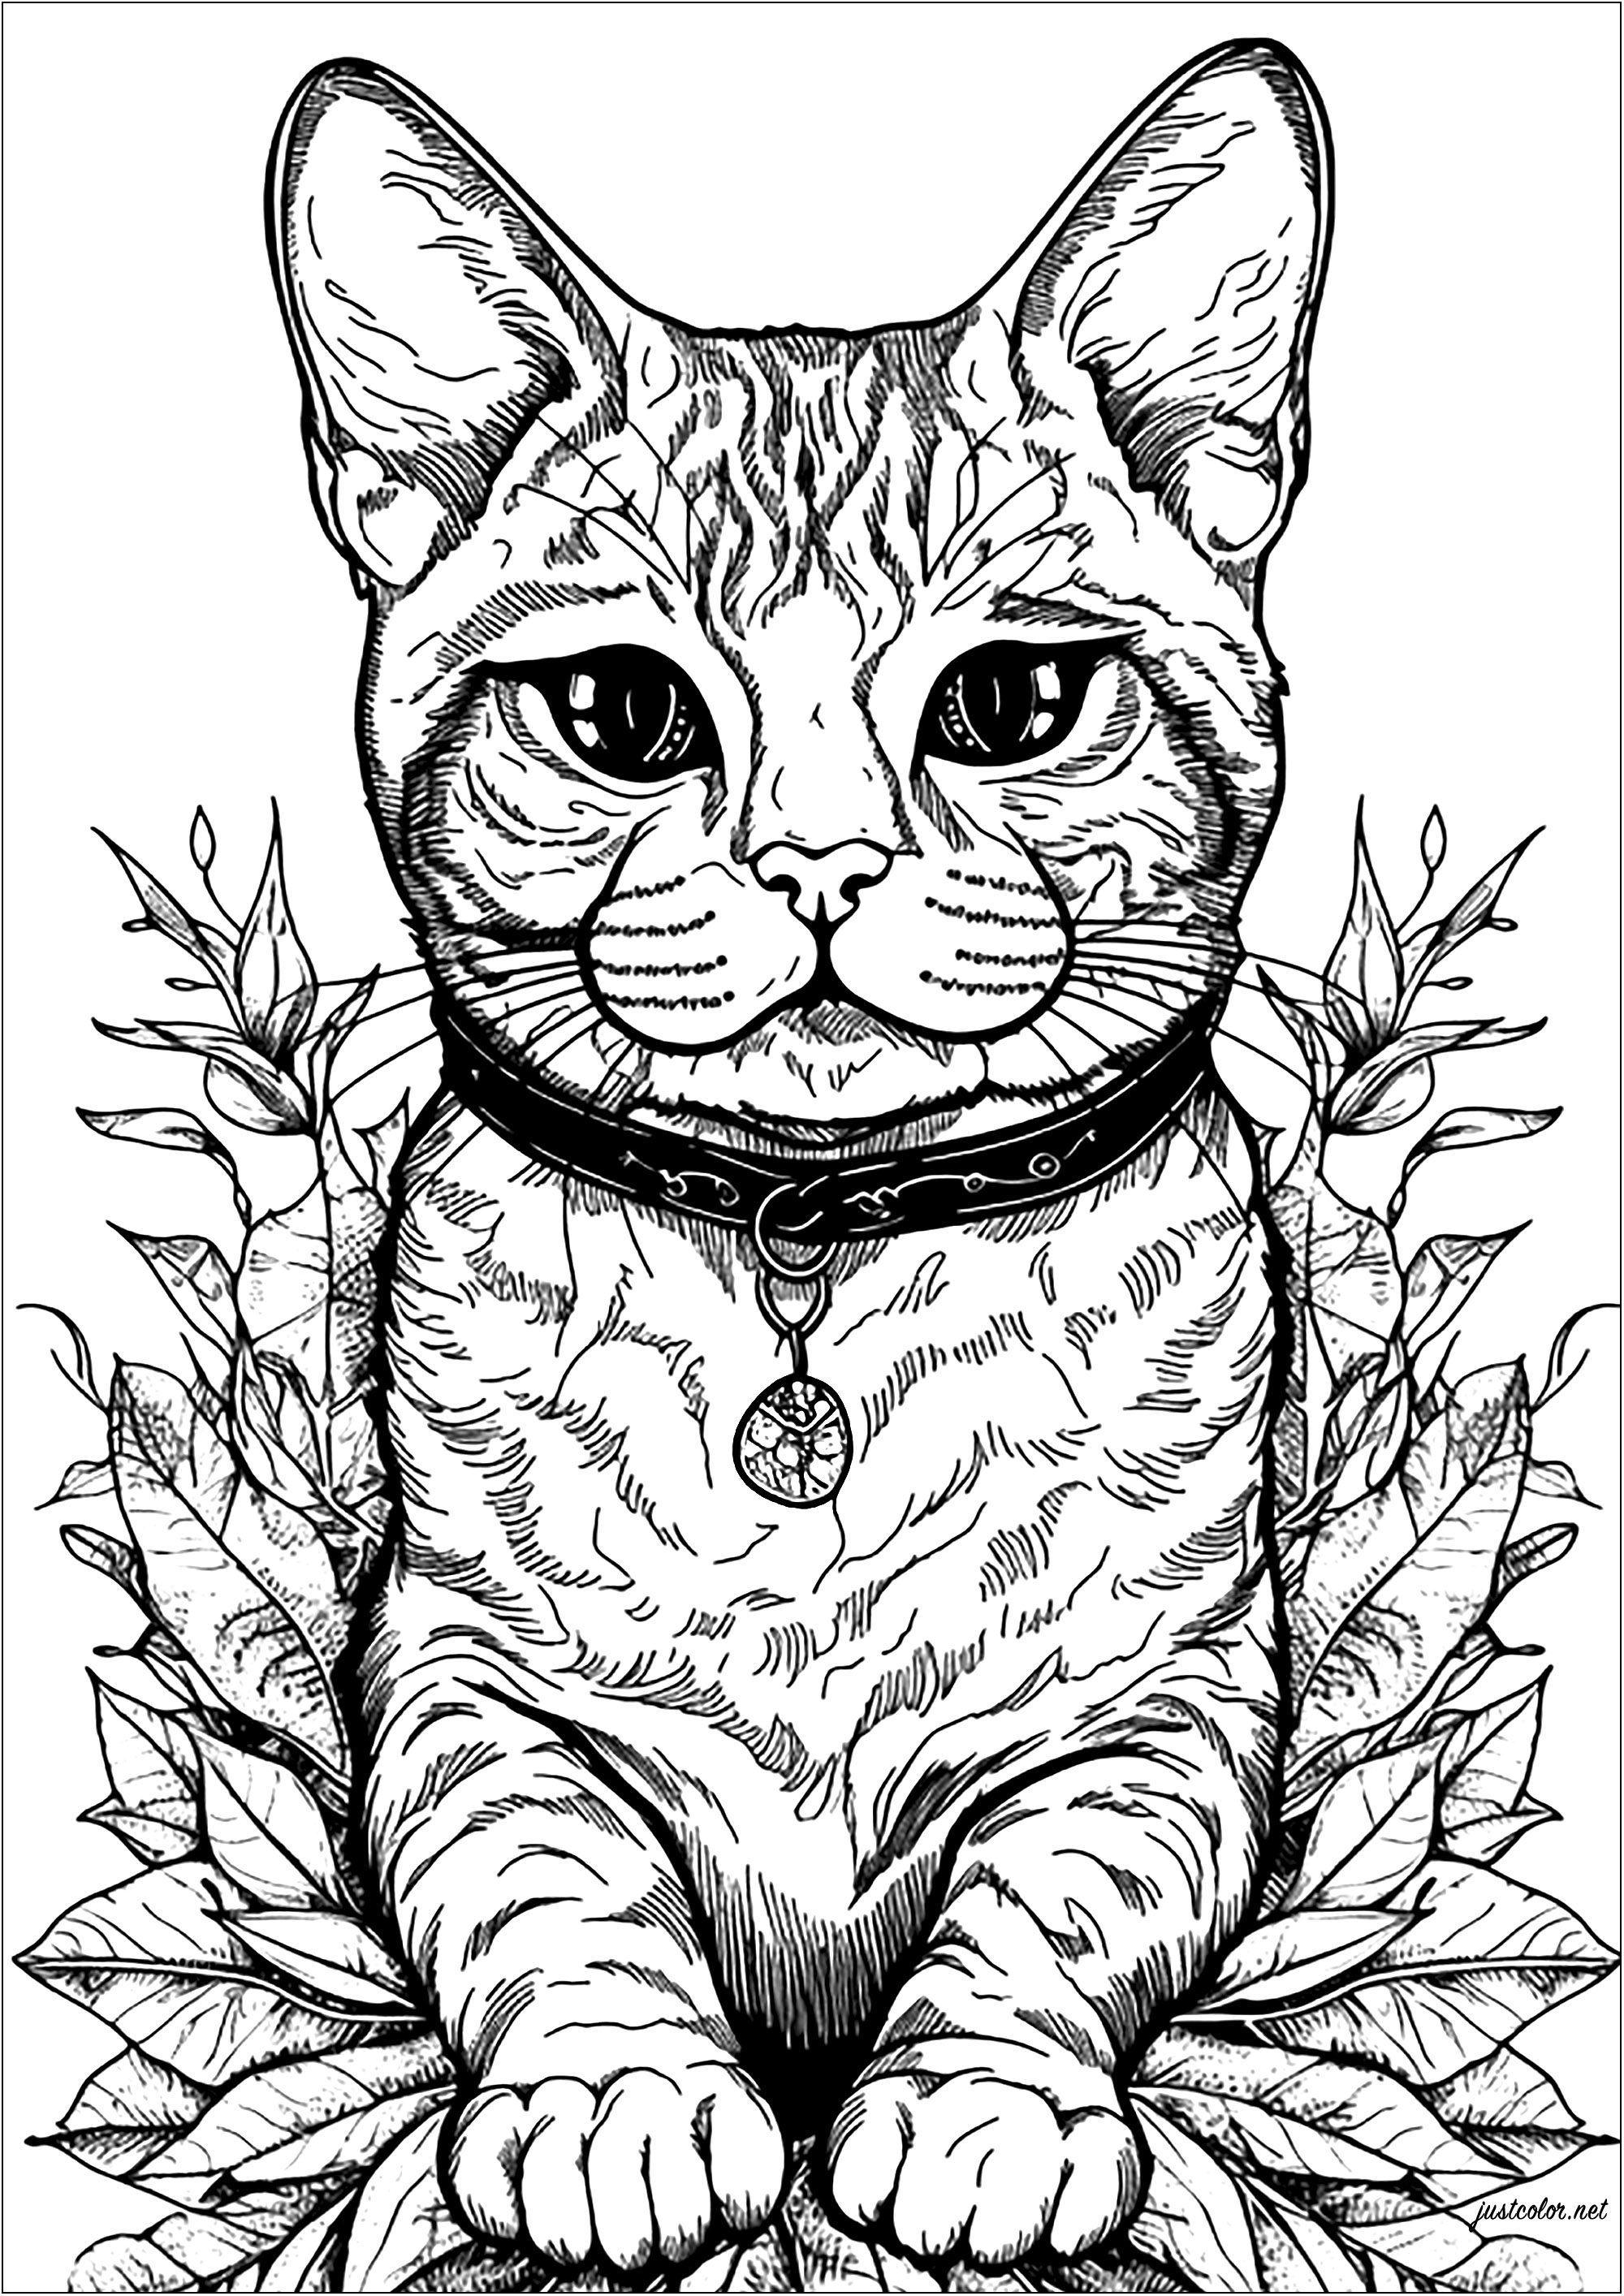 Pretty cat and leaves. A rather simple coloring page, but very pleasant to color.